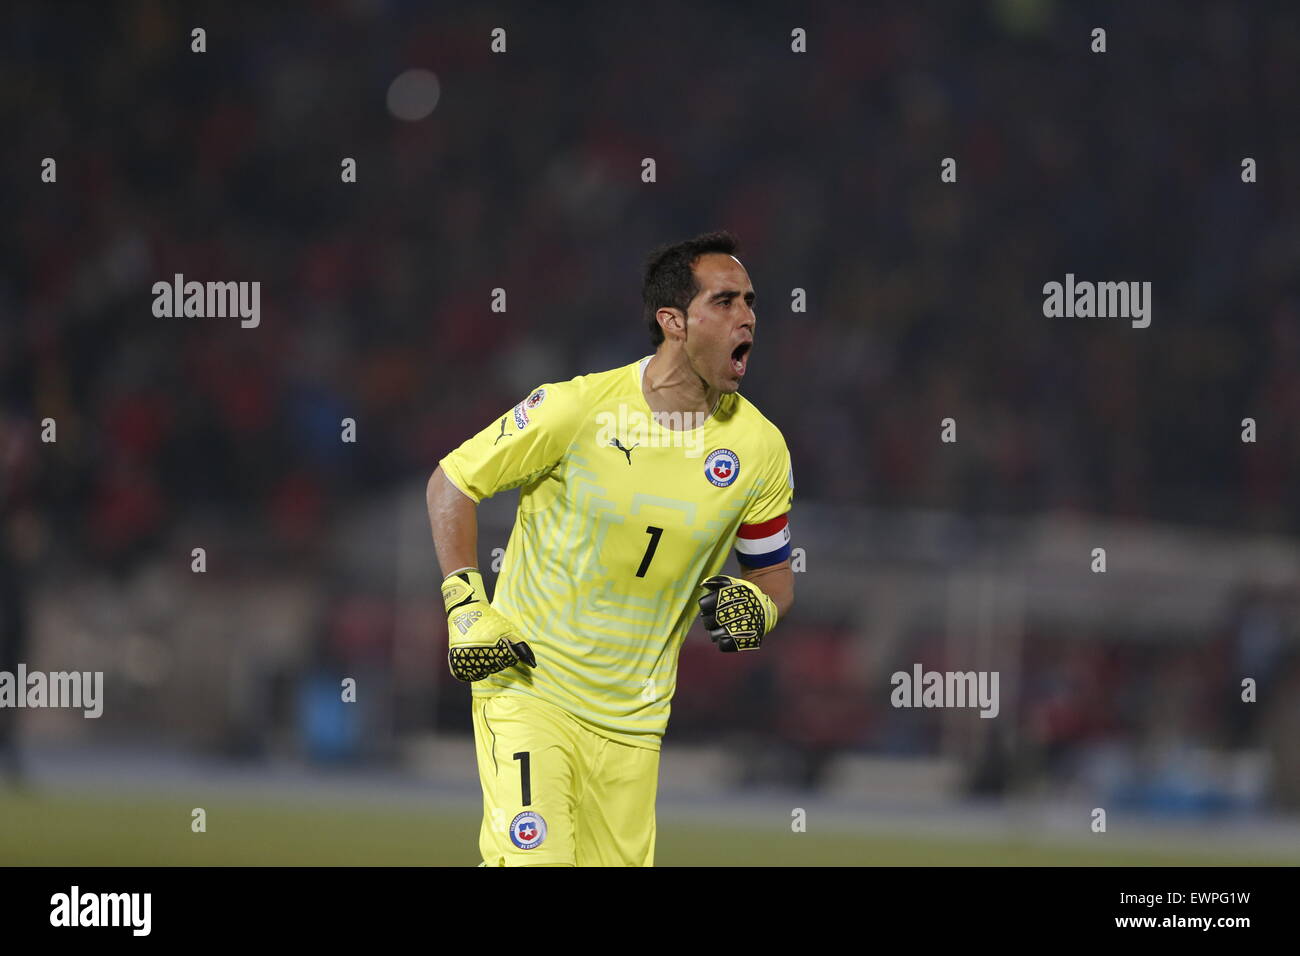 Santiago, Chile. 29th June, 2015. Claudio Bravo from Chile celebrates a goal against Peru during the Copa America Chile 2015 semifinal match, held at National Stadium, in Santiago, Chile, on June 29, 2015. Chile won 2-1 Credit:  Pedro Mera/Xinhua/Alamy Live News Stock Photo